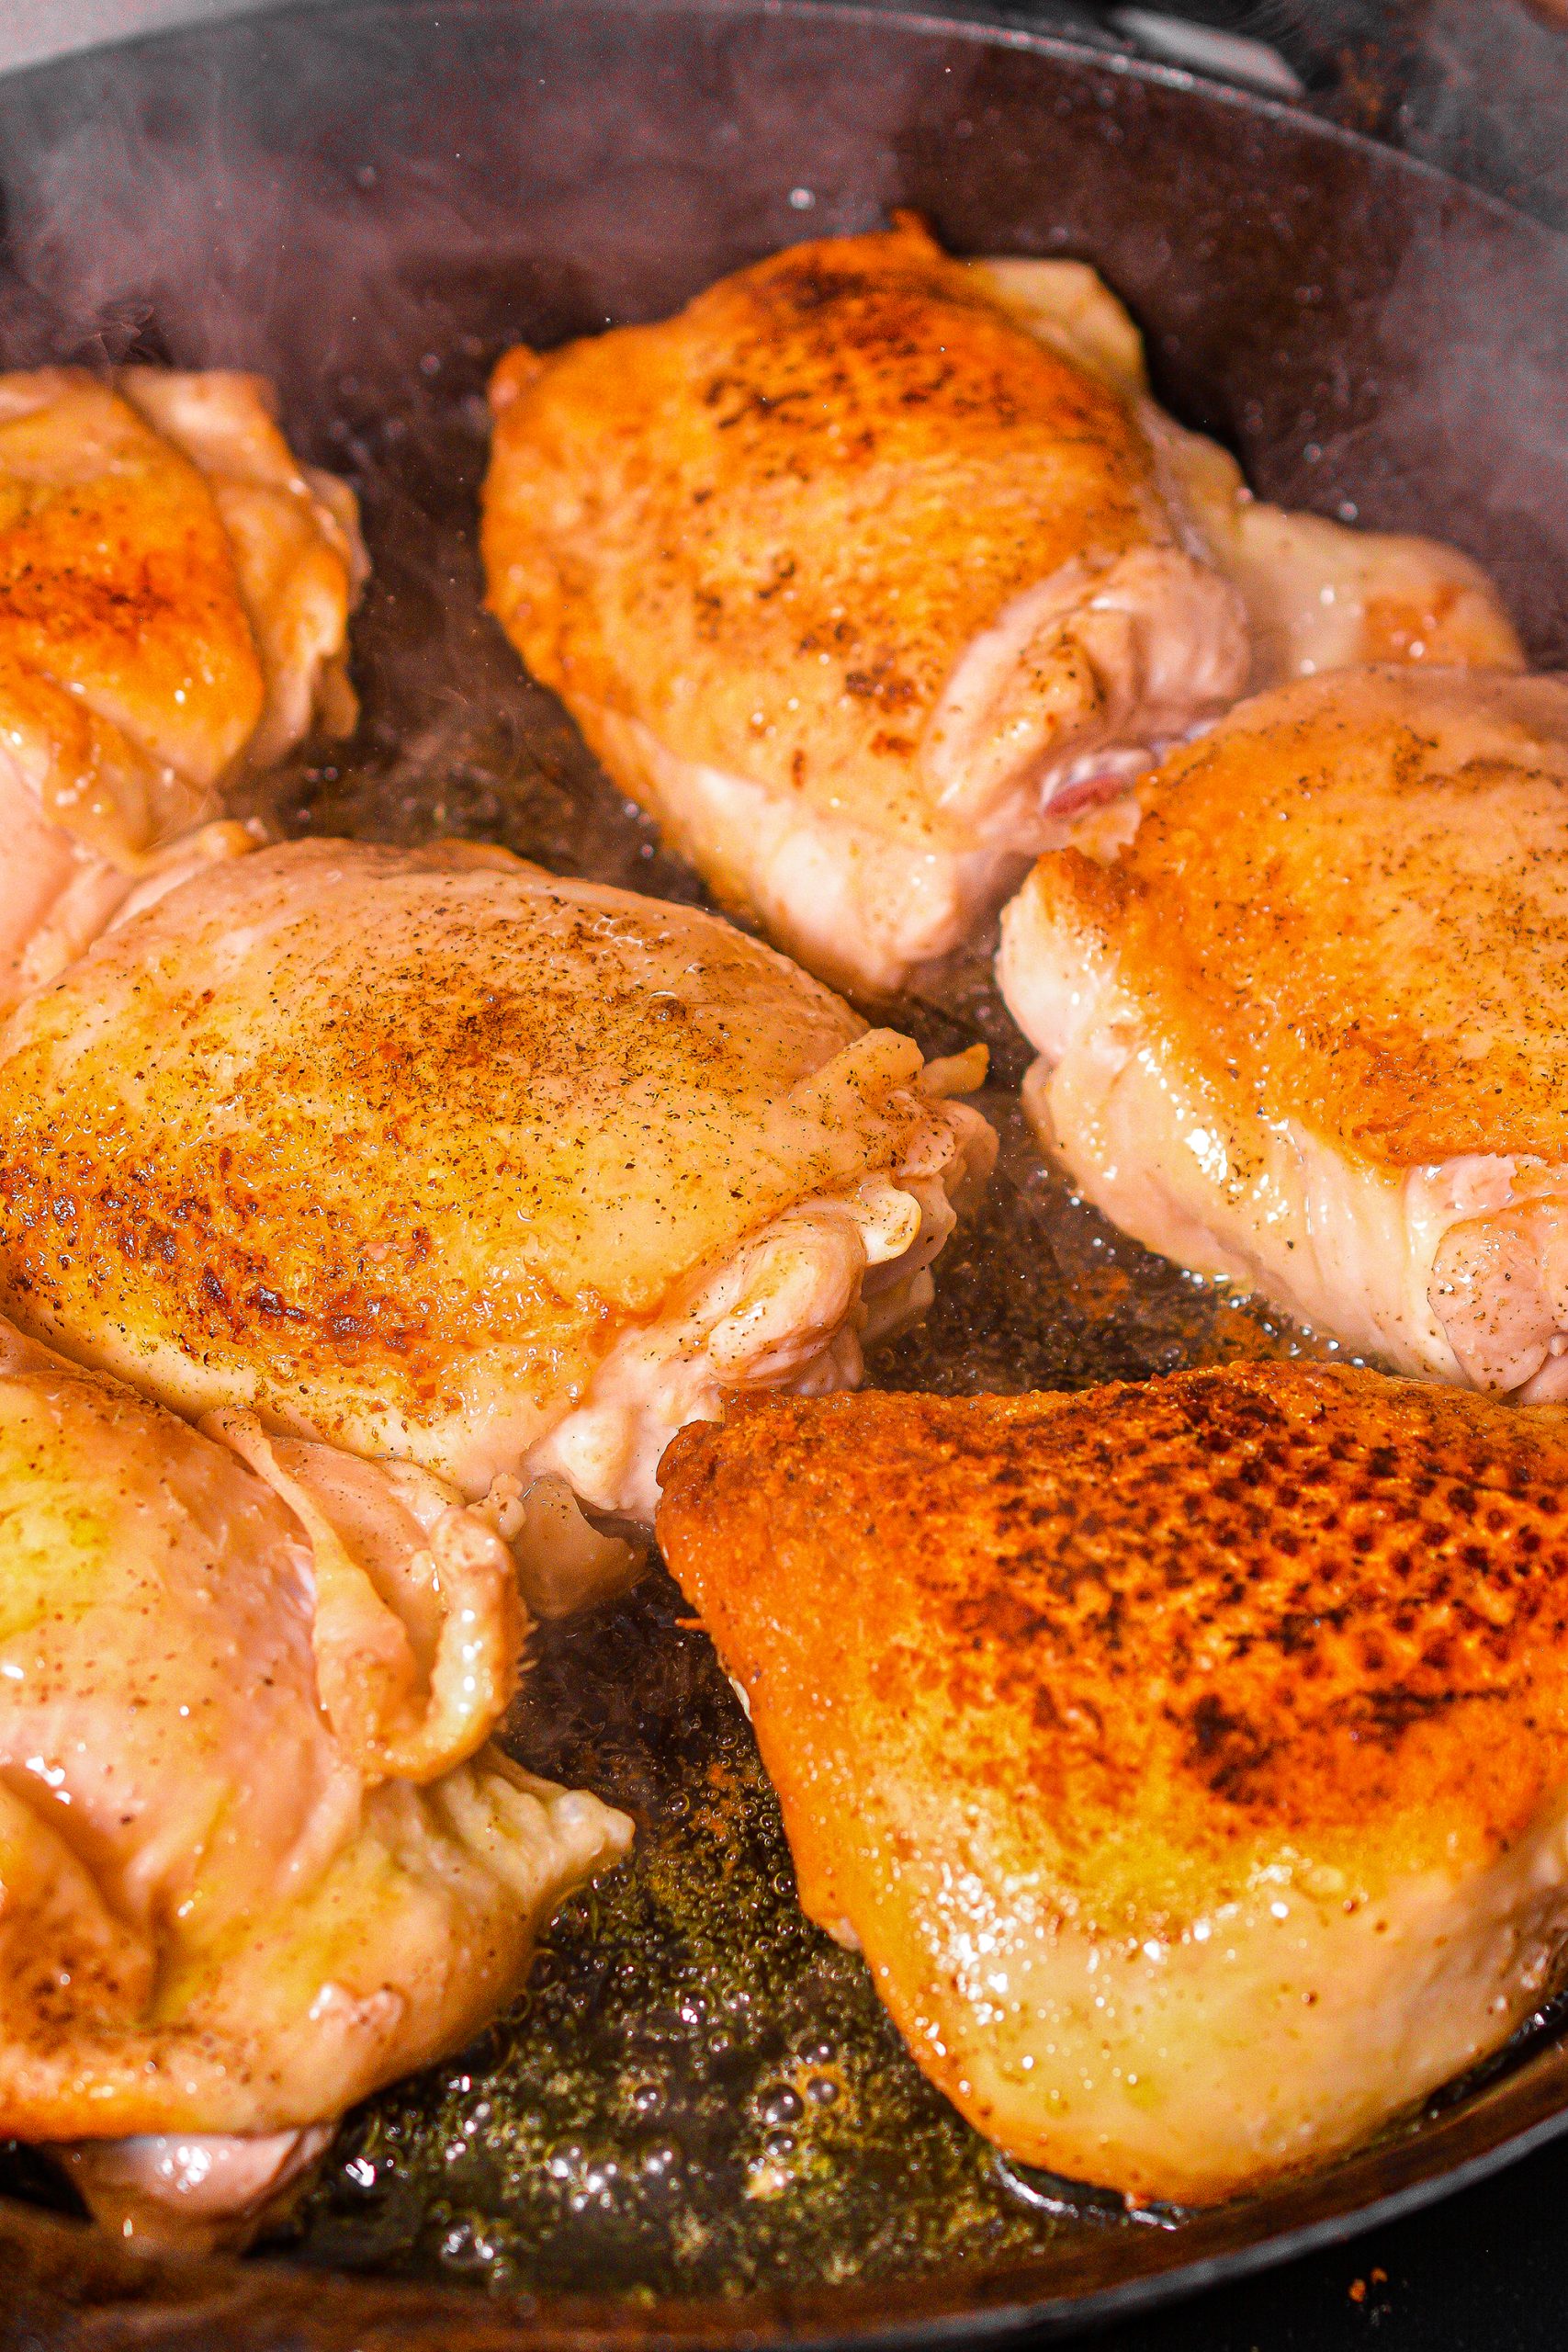 Add the chicken to the skillet and brown on both sides, then remove and set aside.